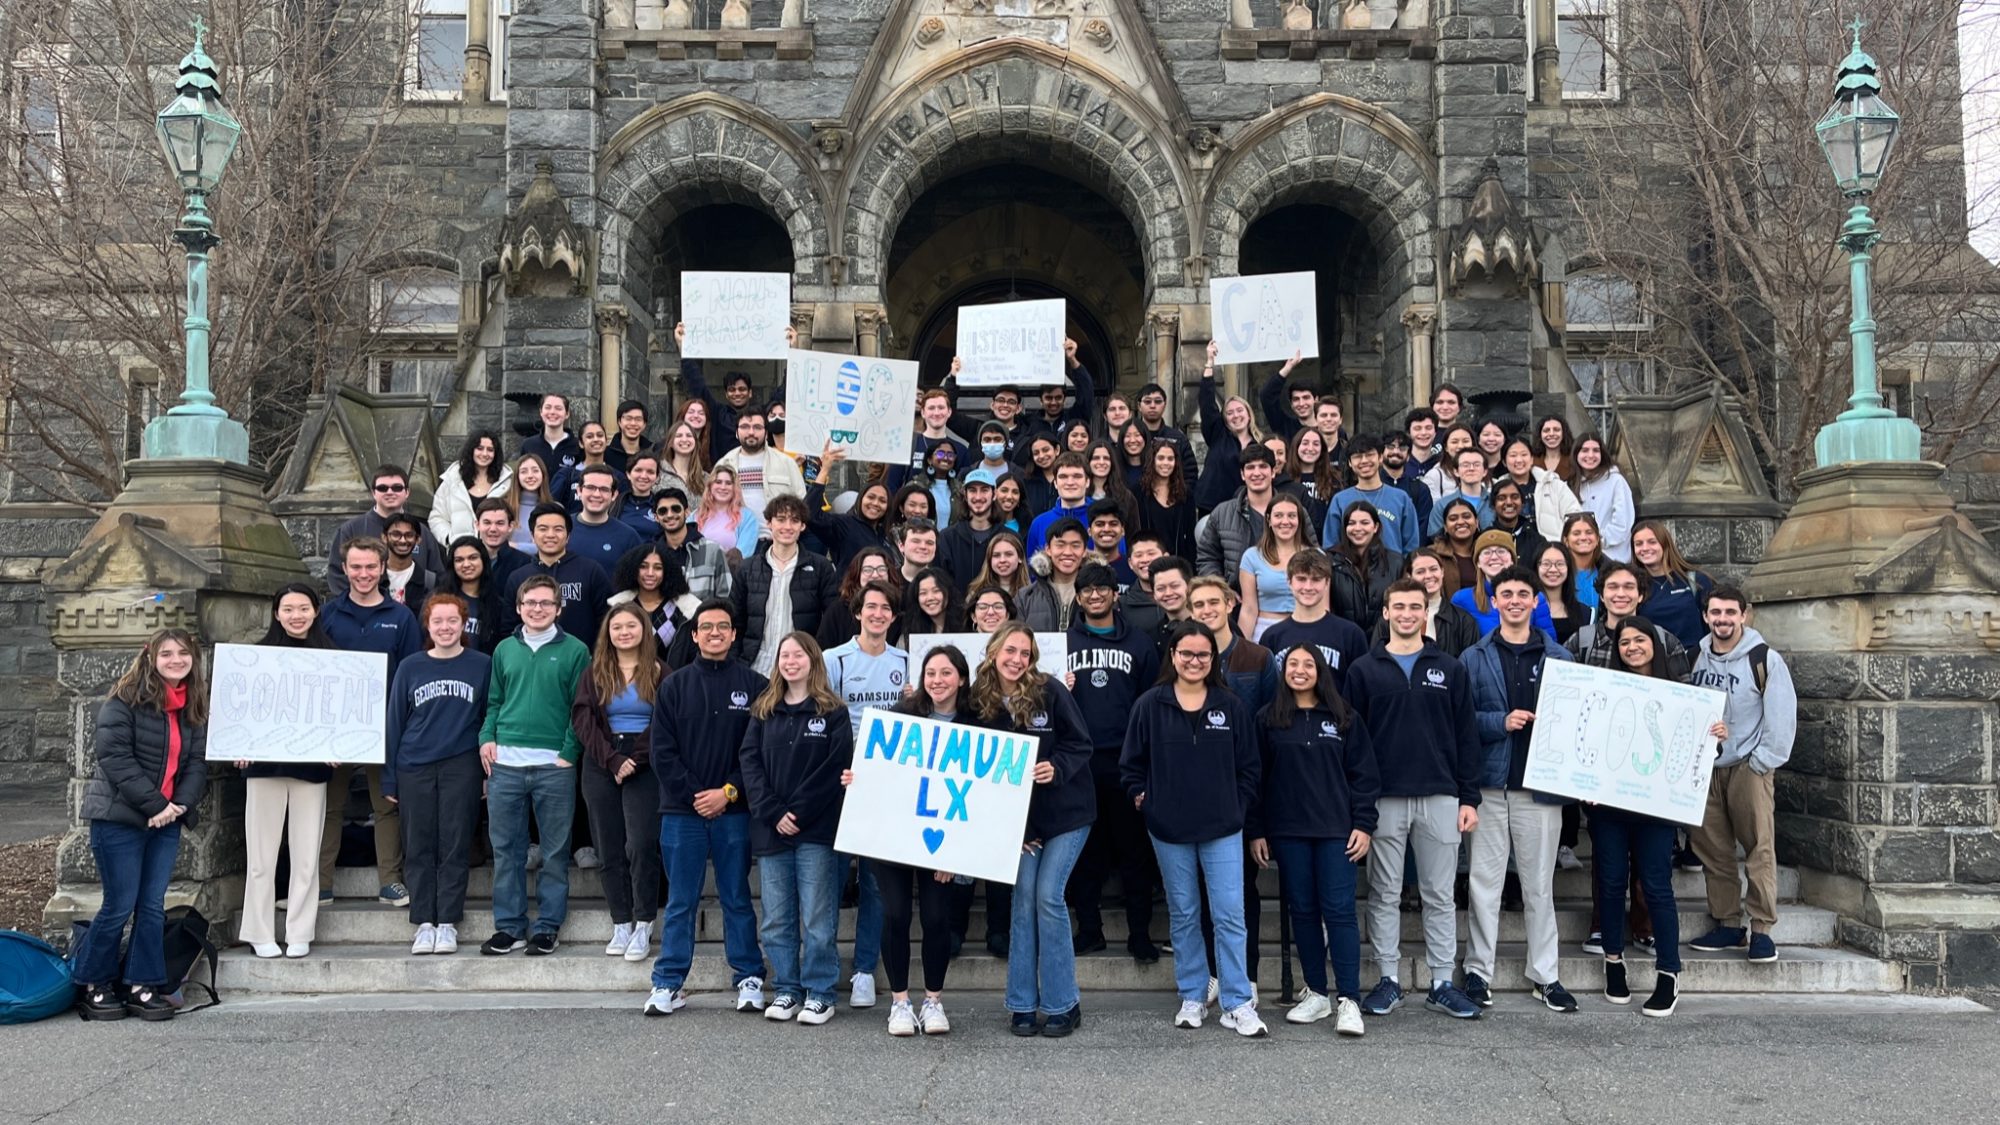 NAIMUN students stand on Healy steps for a group photo, holding NAIMUN signs